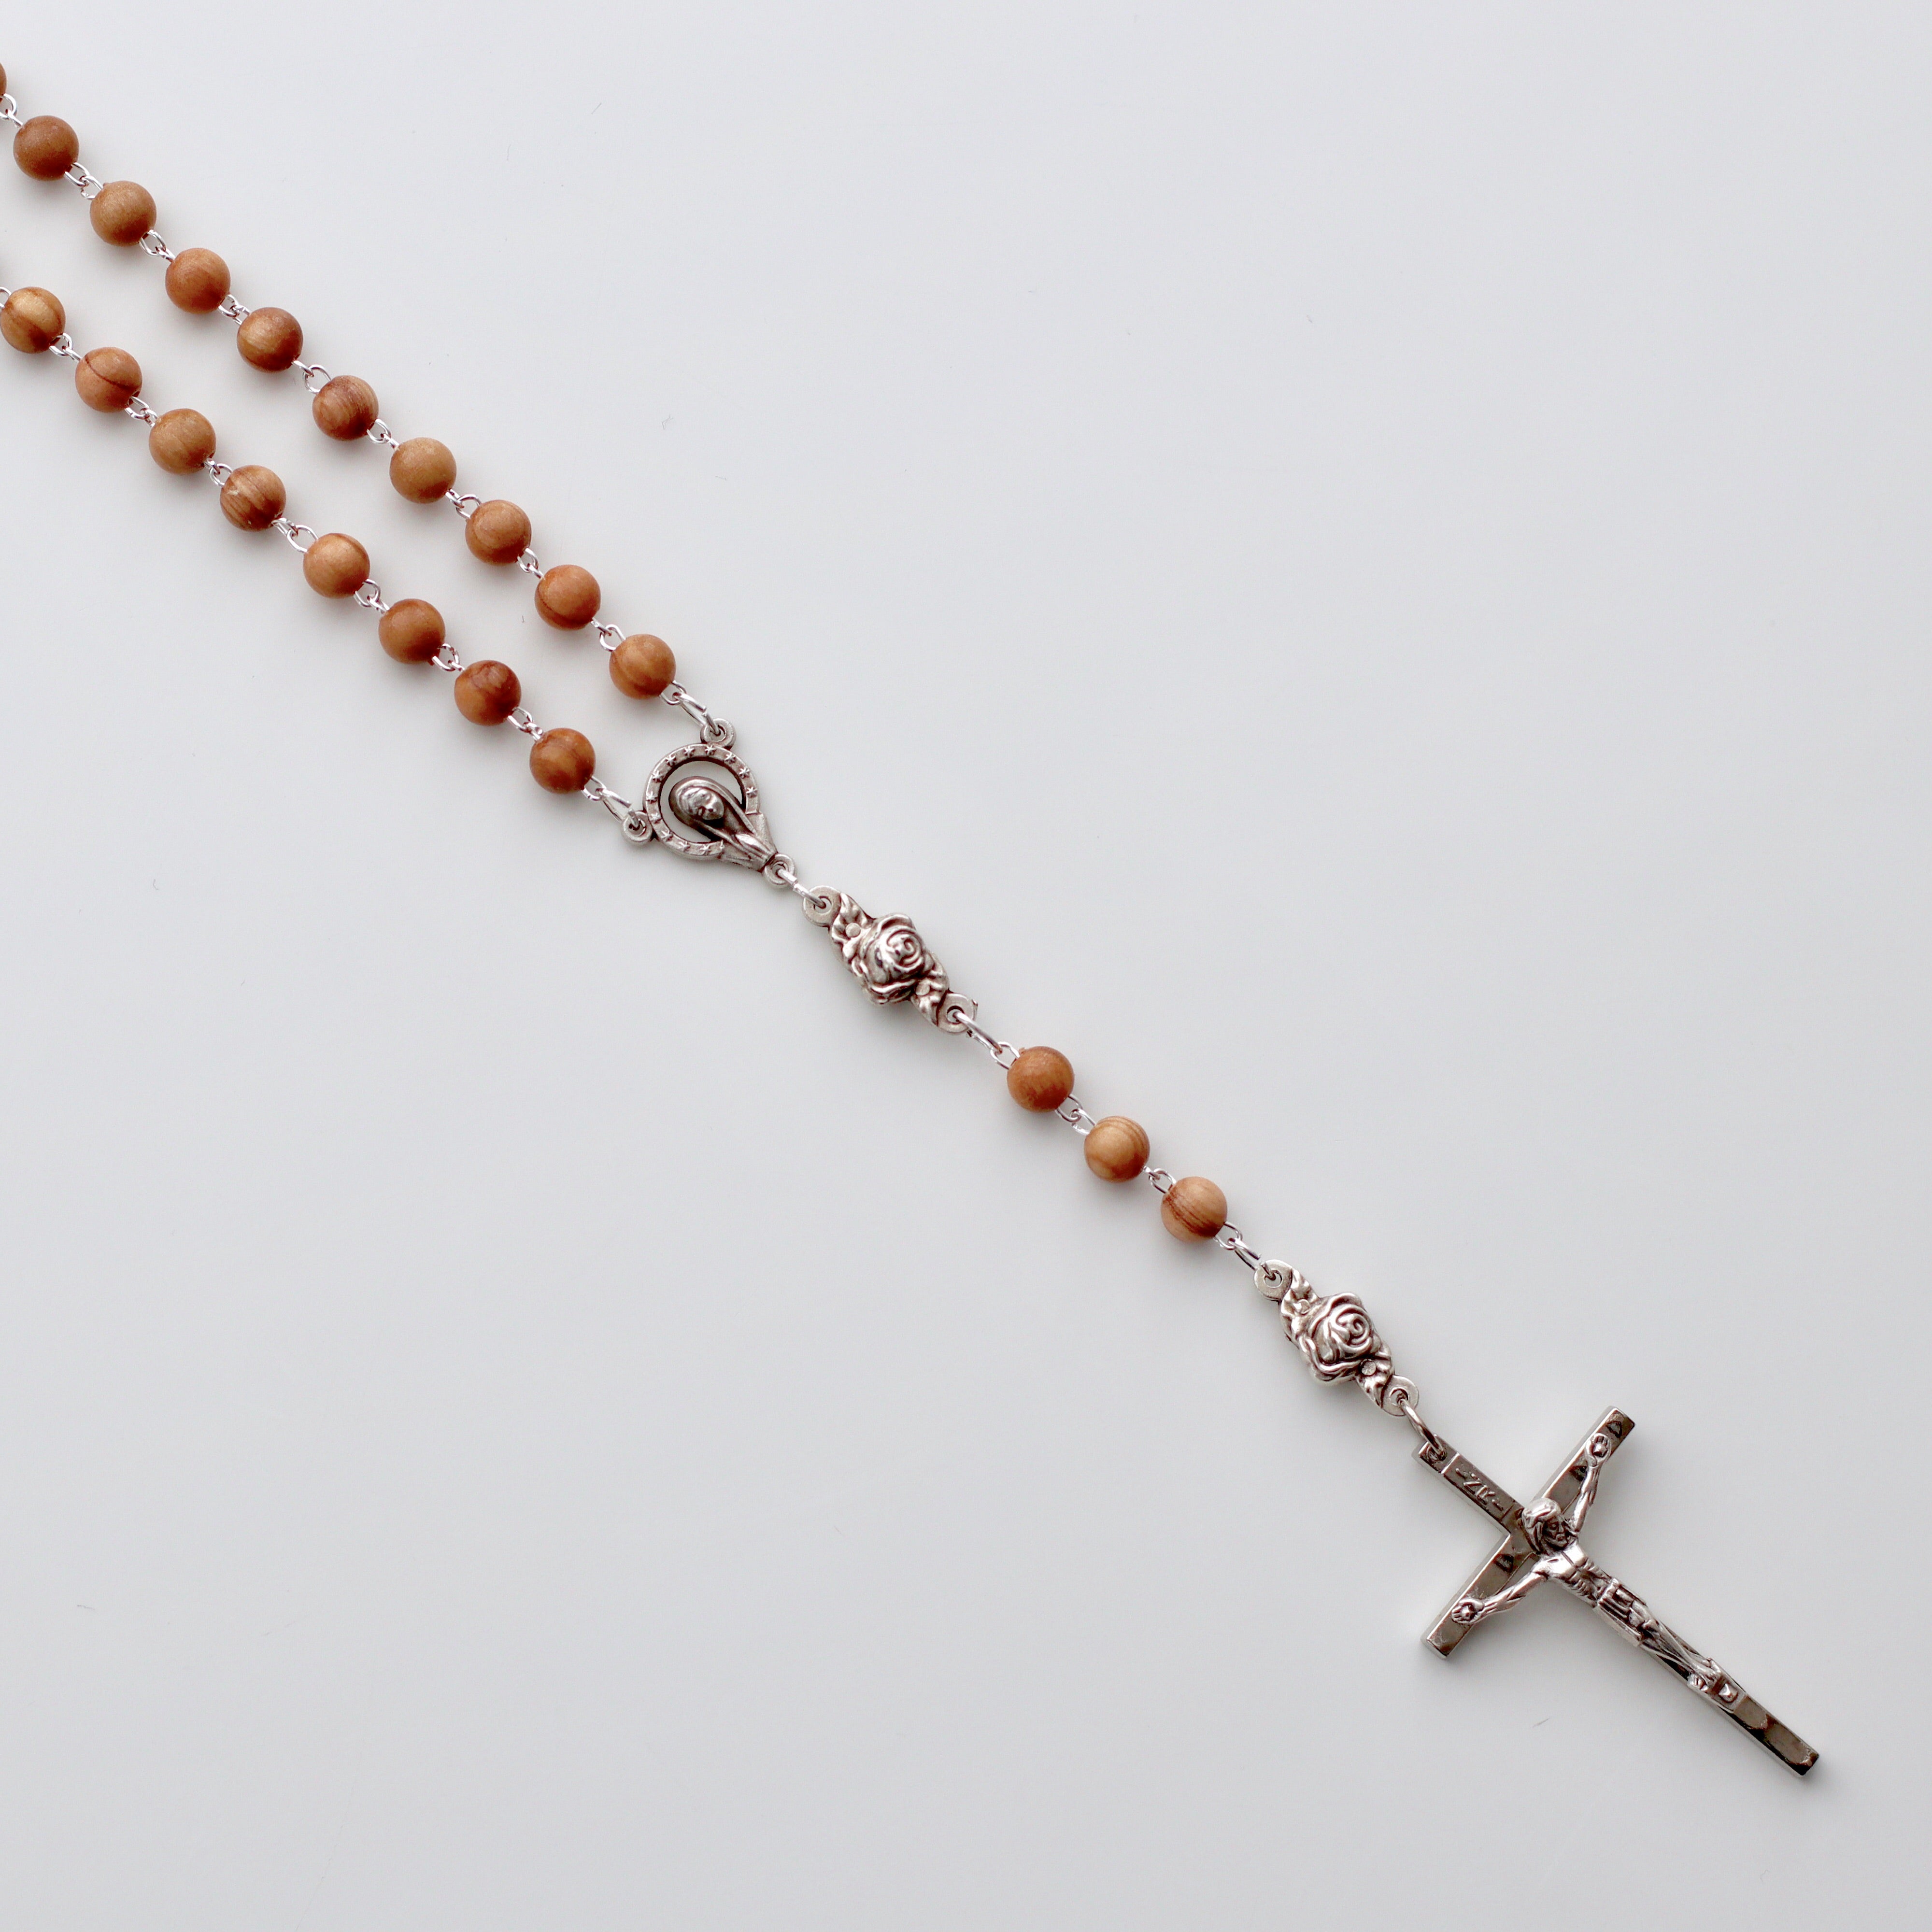 Wooden St Benedict Rosary Beads - Handmade Wooden and Metal Rosaries with  Crucifix Come in a Rosary Pouch to Make a Great Catholic or Christian Gift  : Amazon.in: Home & Kitchen